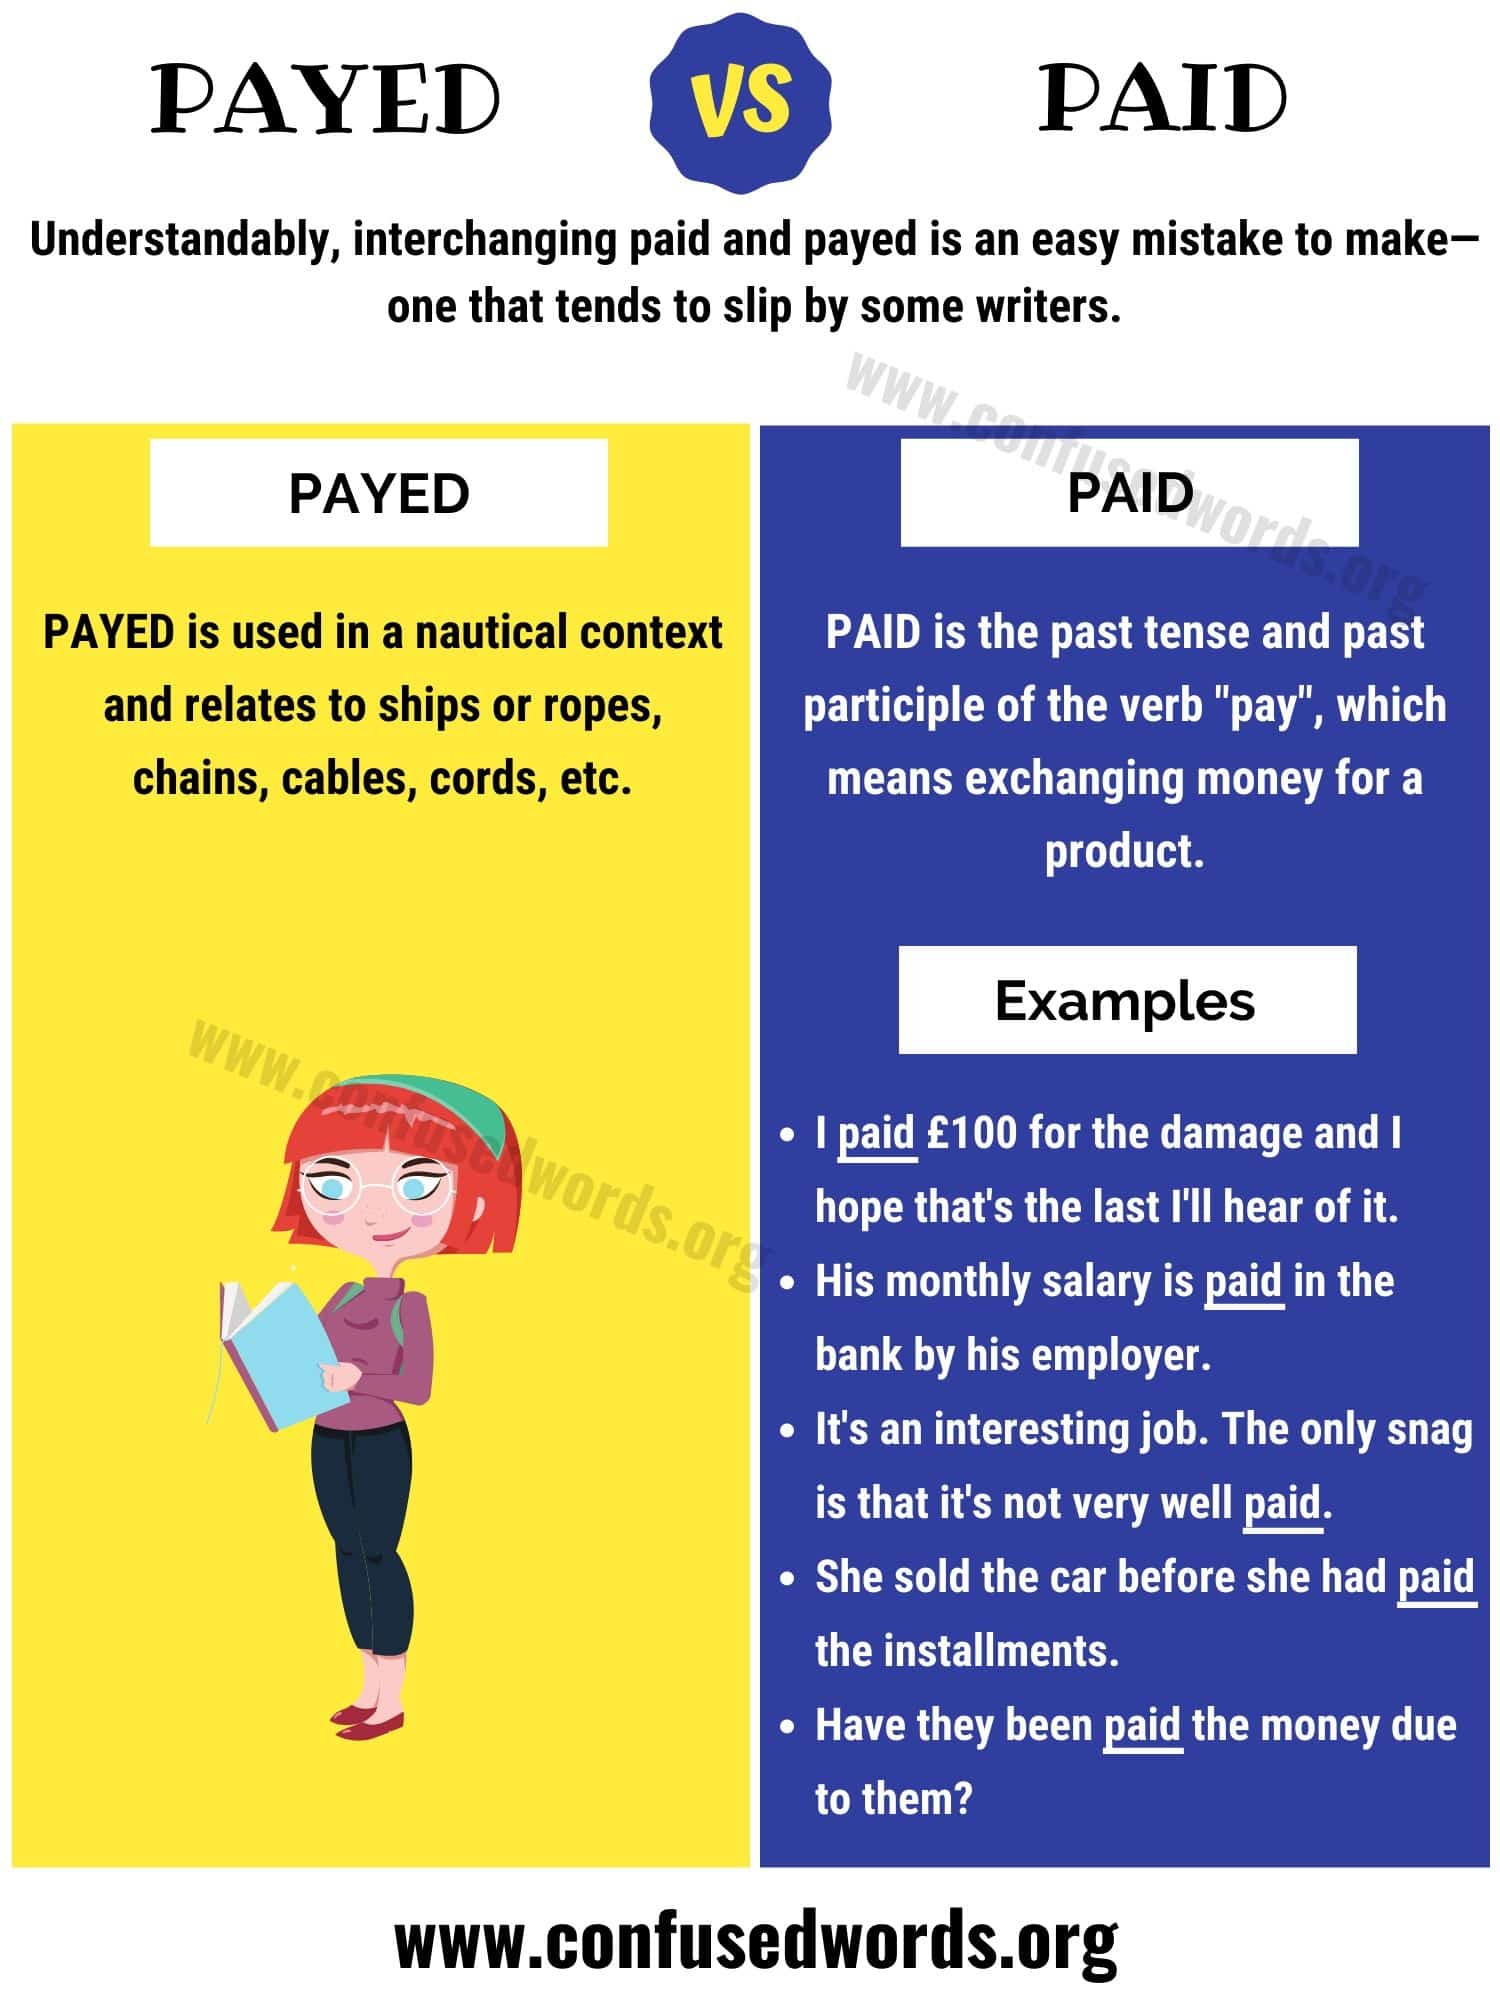 Payed vs Paid